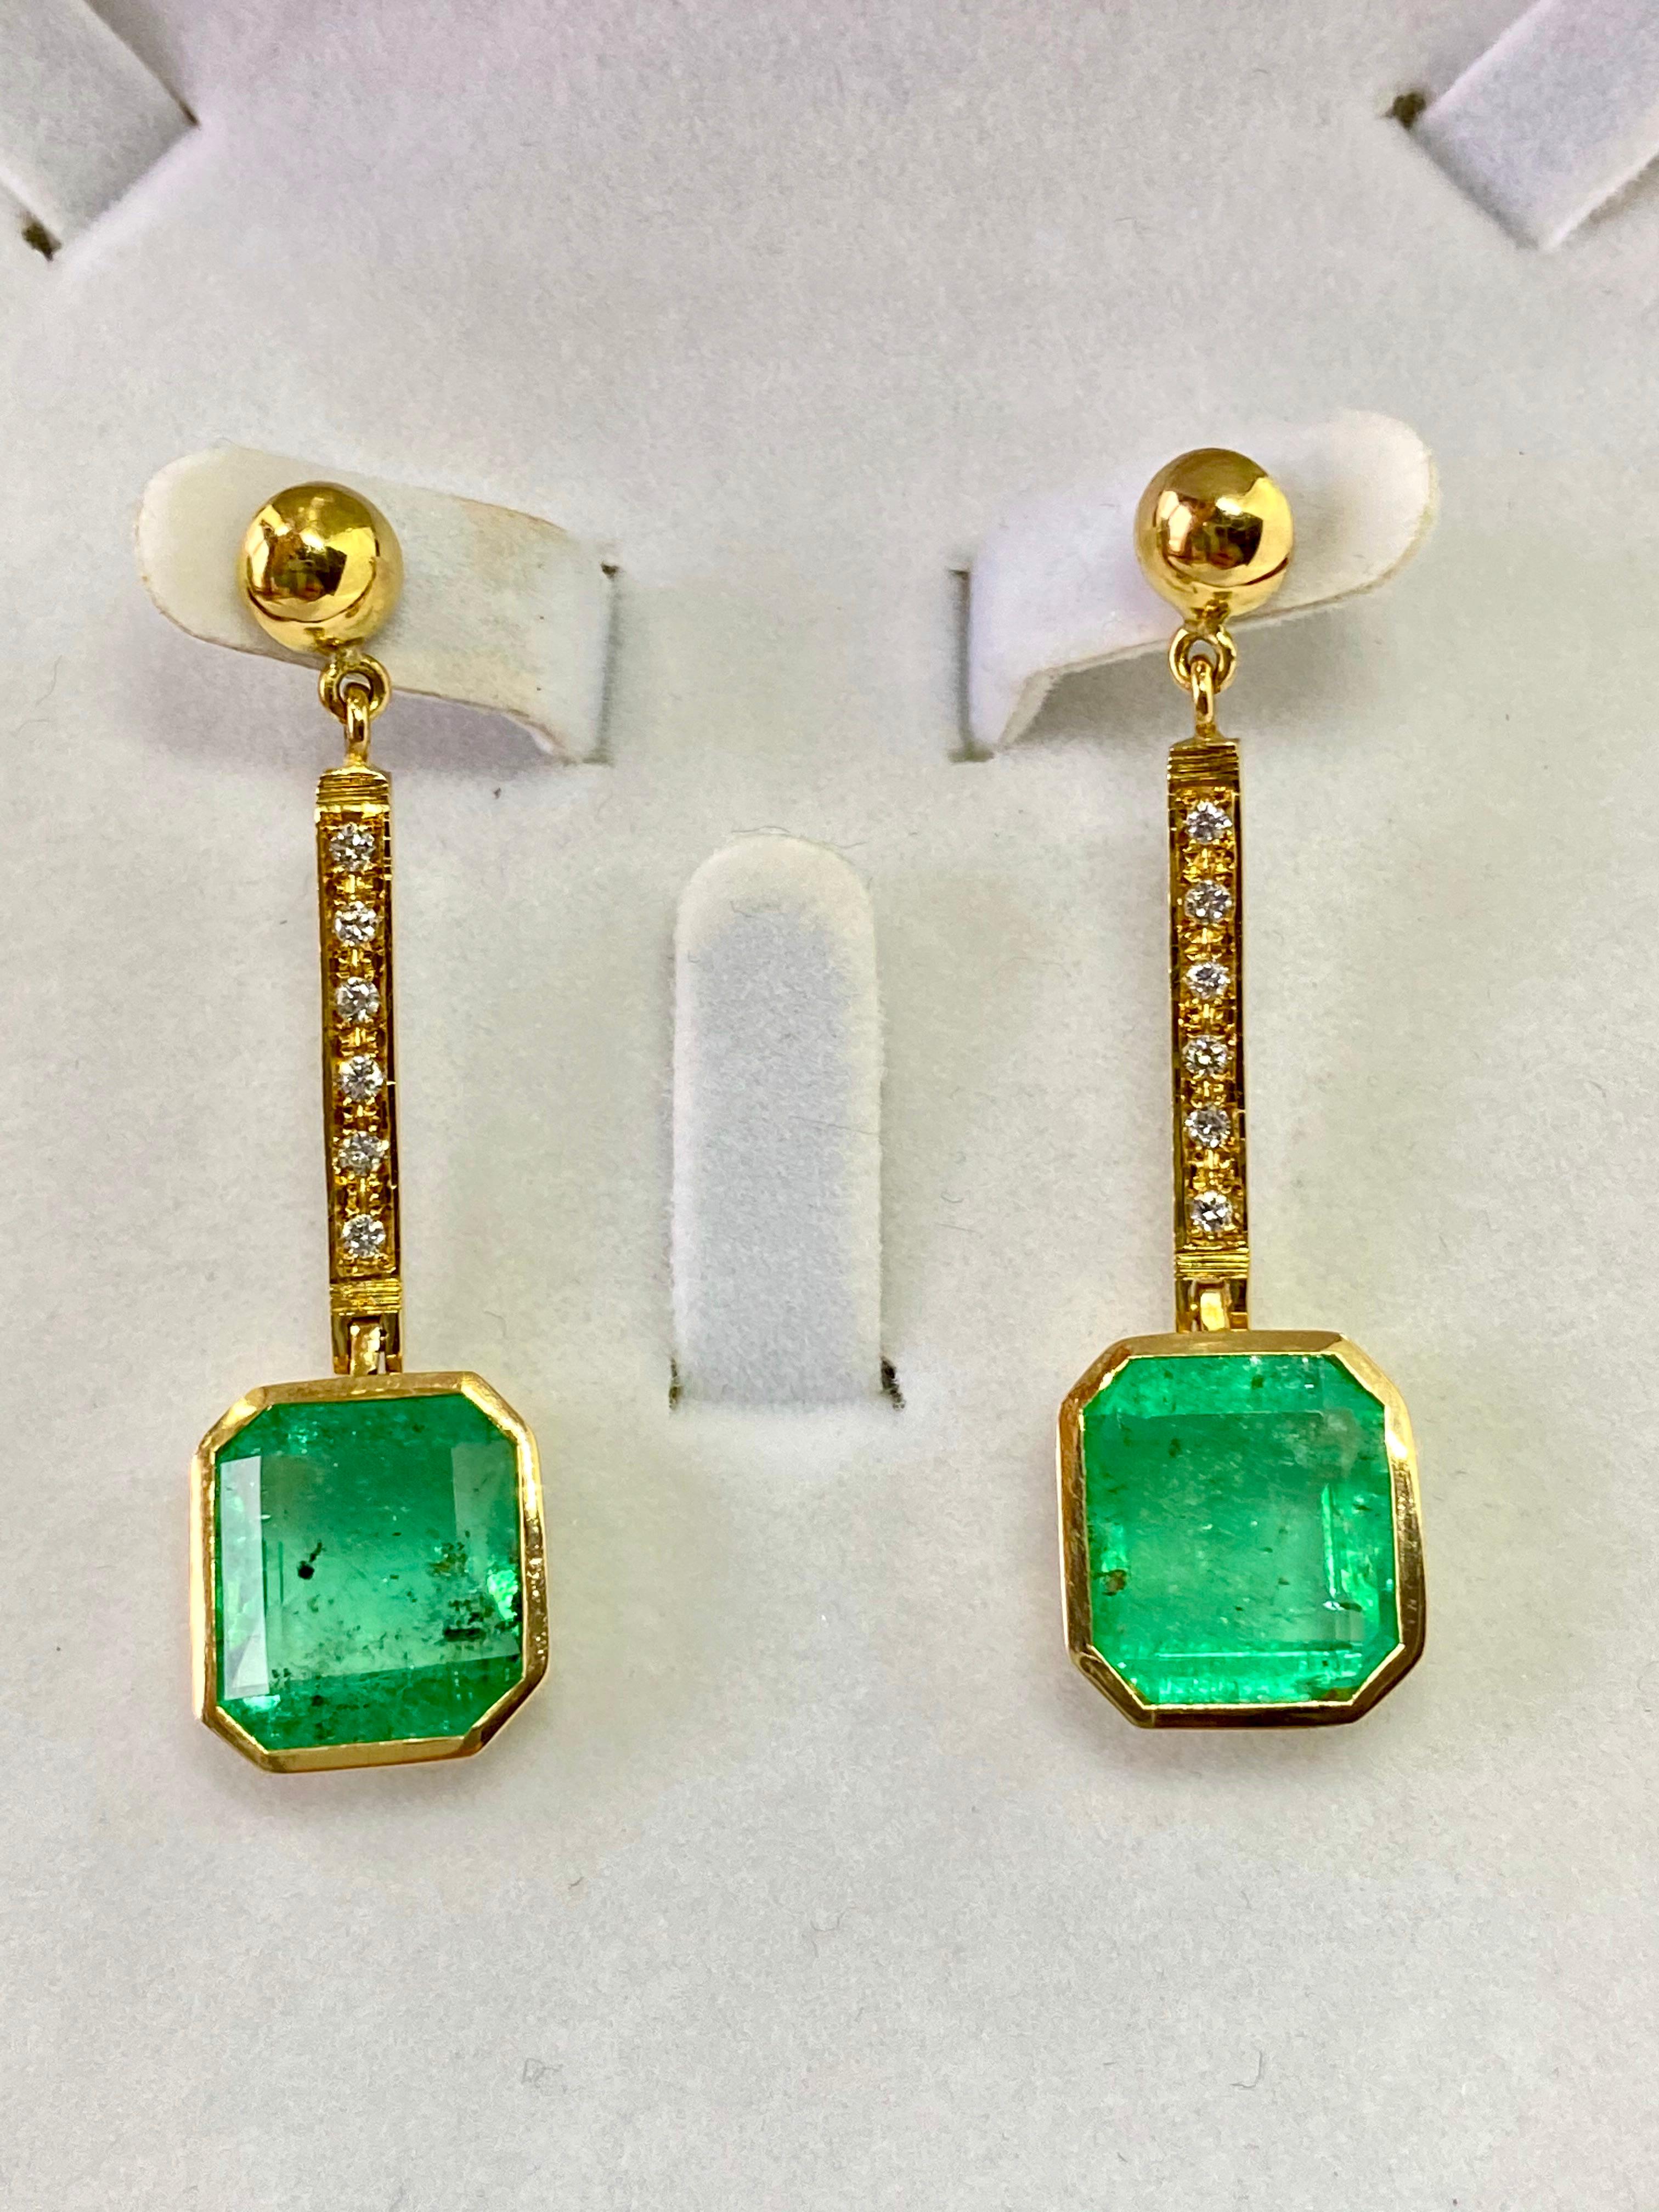 11.75 carats total weight square natural Colombian emerald and diamonds Earrings in 18k yellow gold. Emerald cut natural Colombian emeralds, medium green, with visible natural inclusions. Diamond color: H-G, Clarity: SI1, round cut.  Earrings